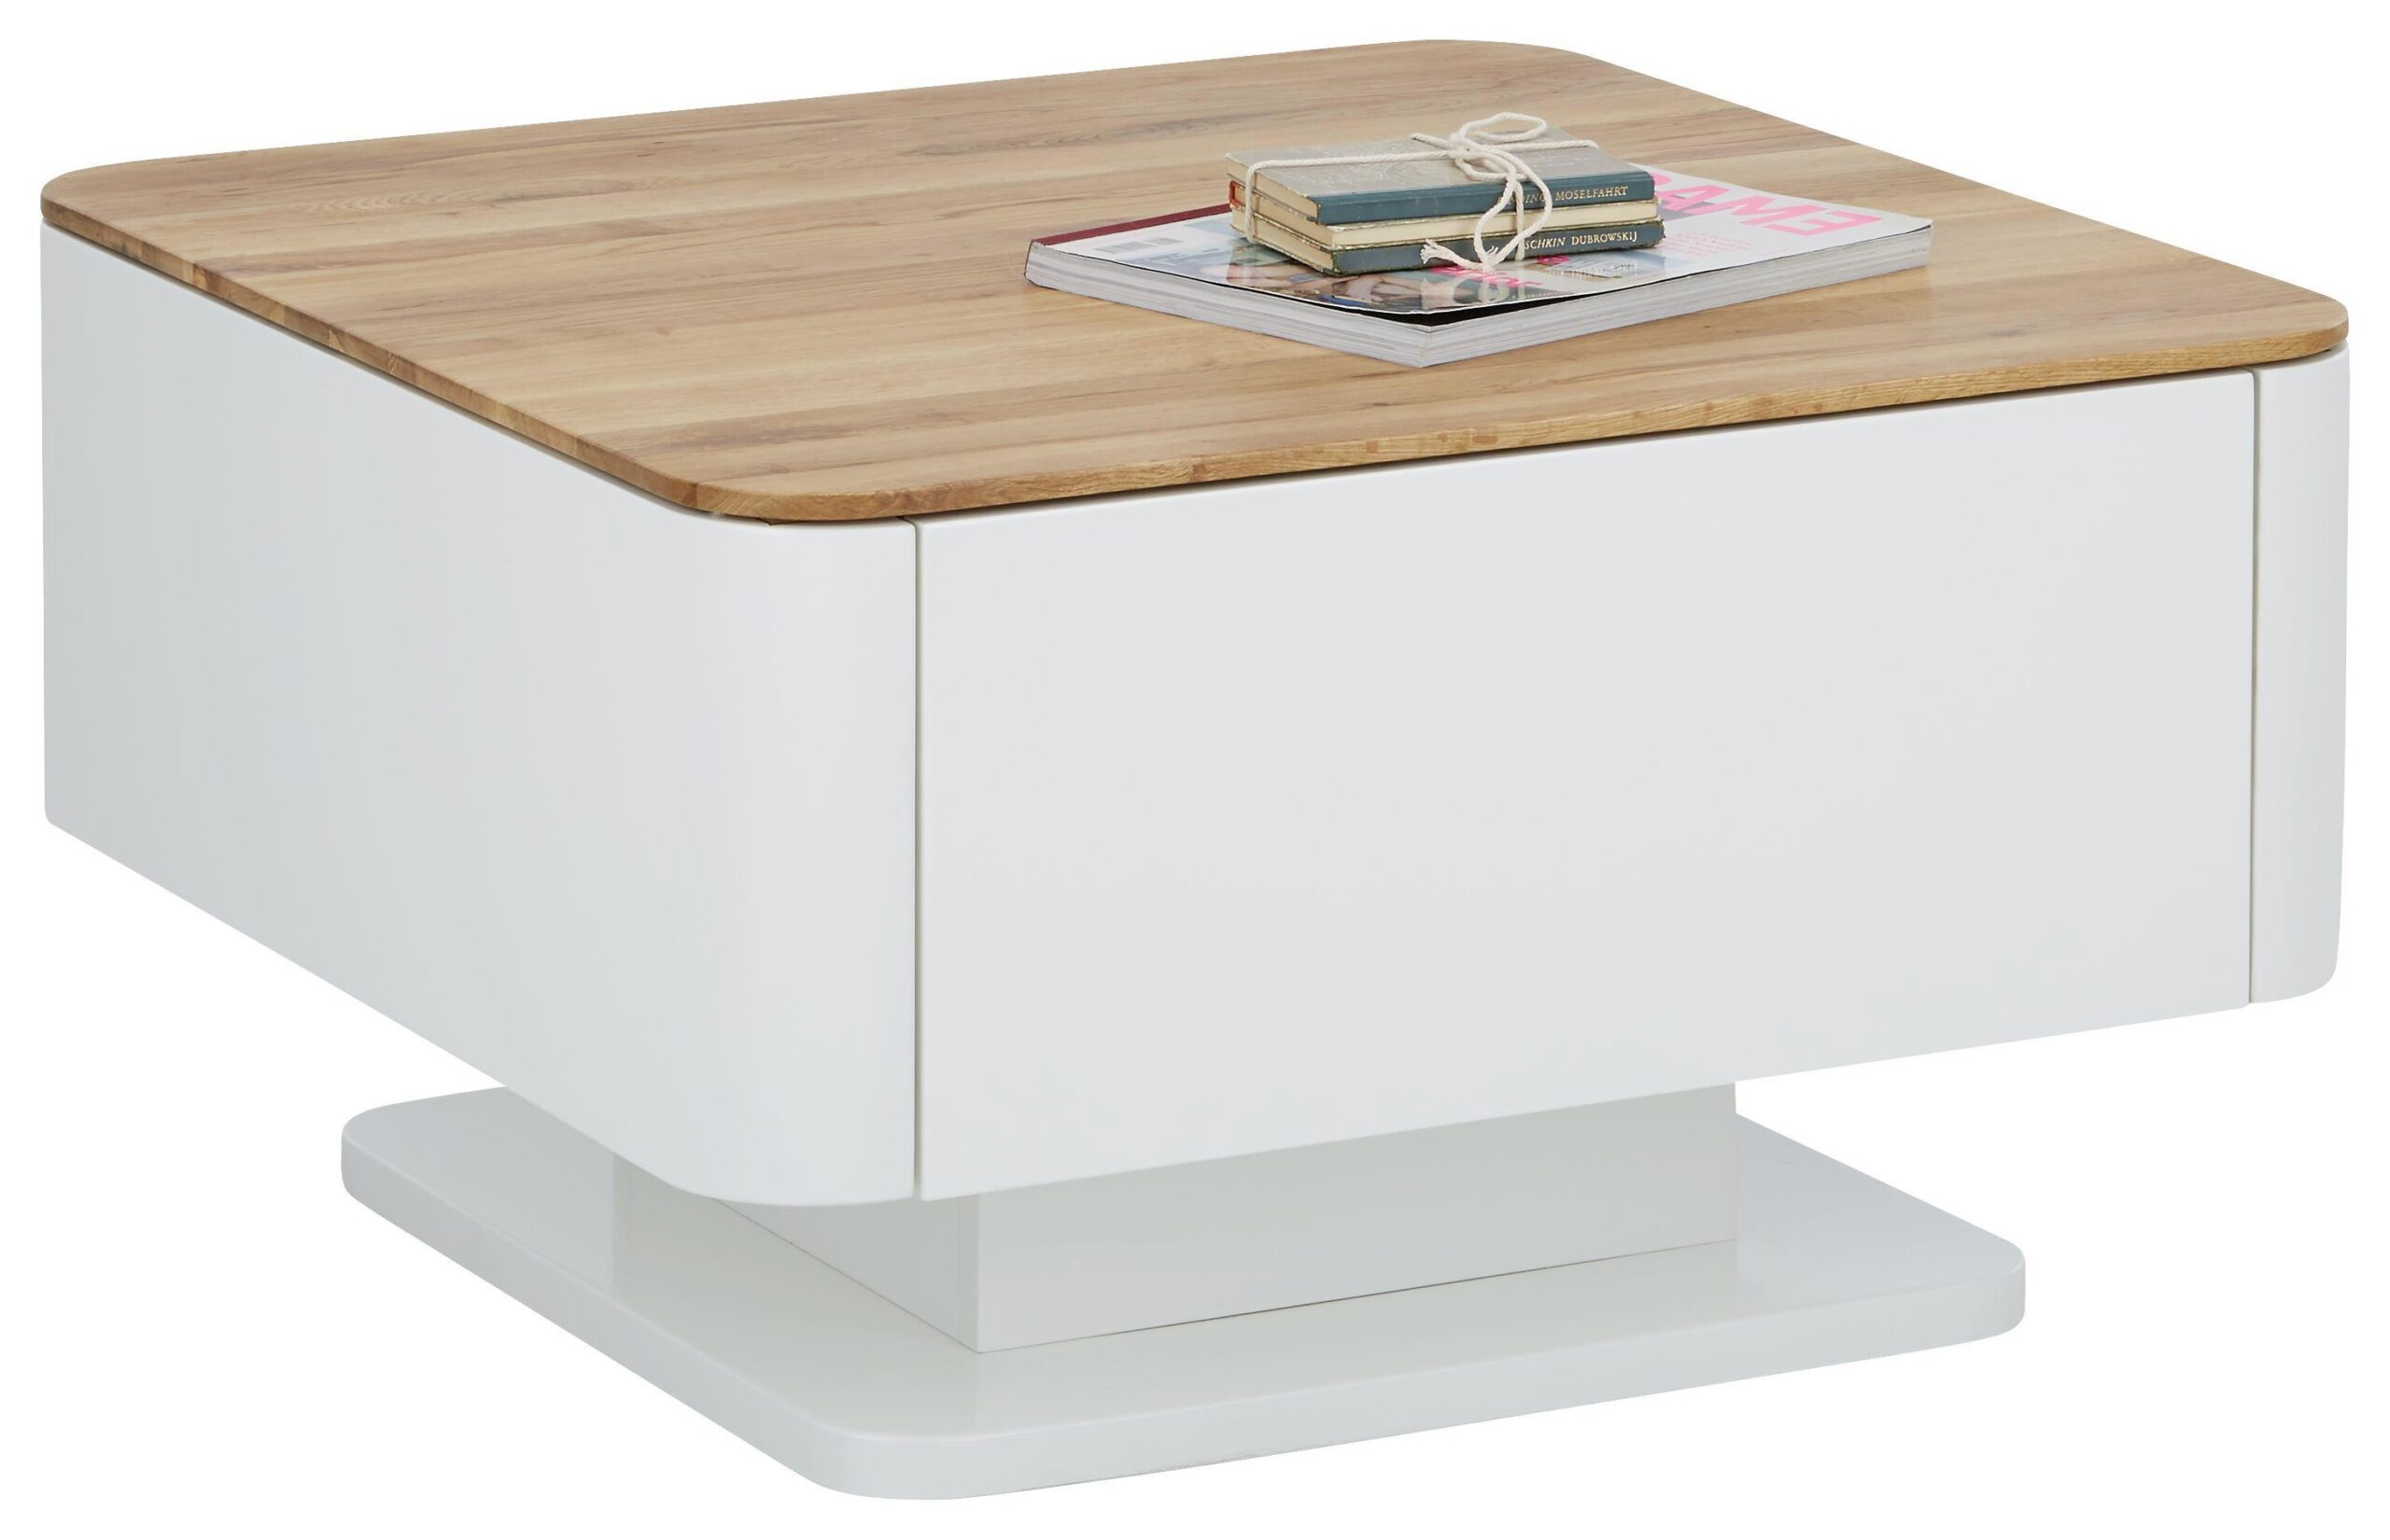 Modern convertible coffee table increases functionality